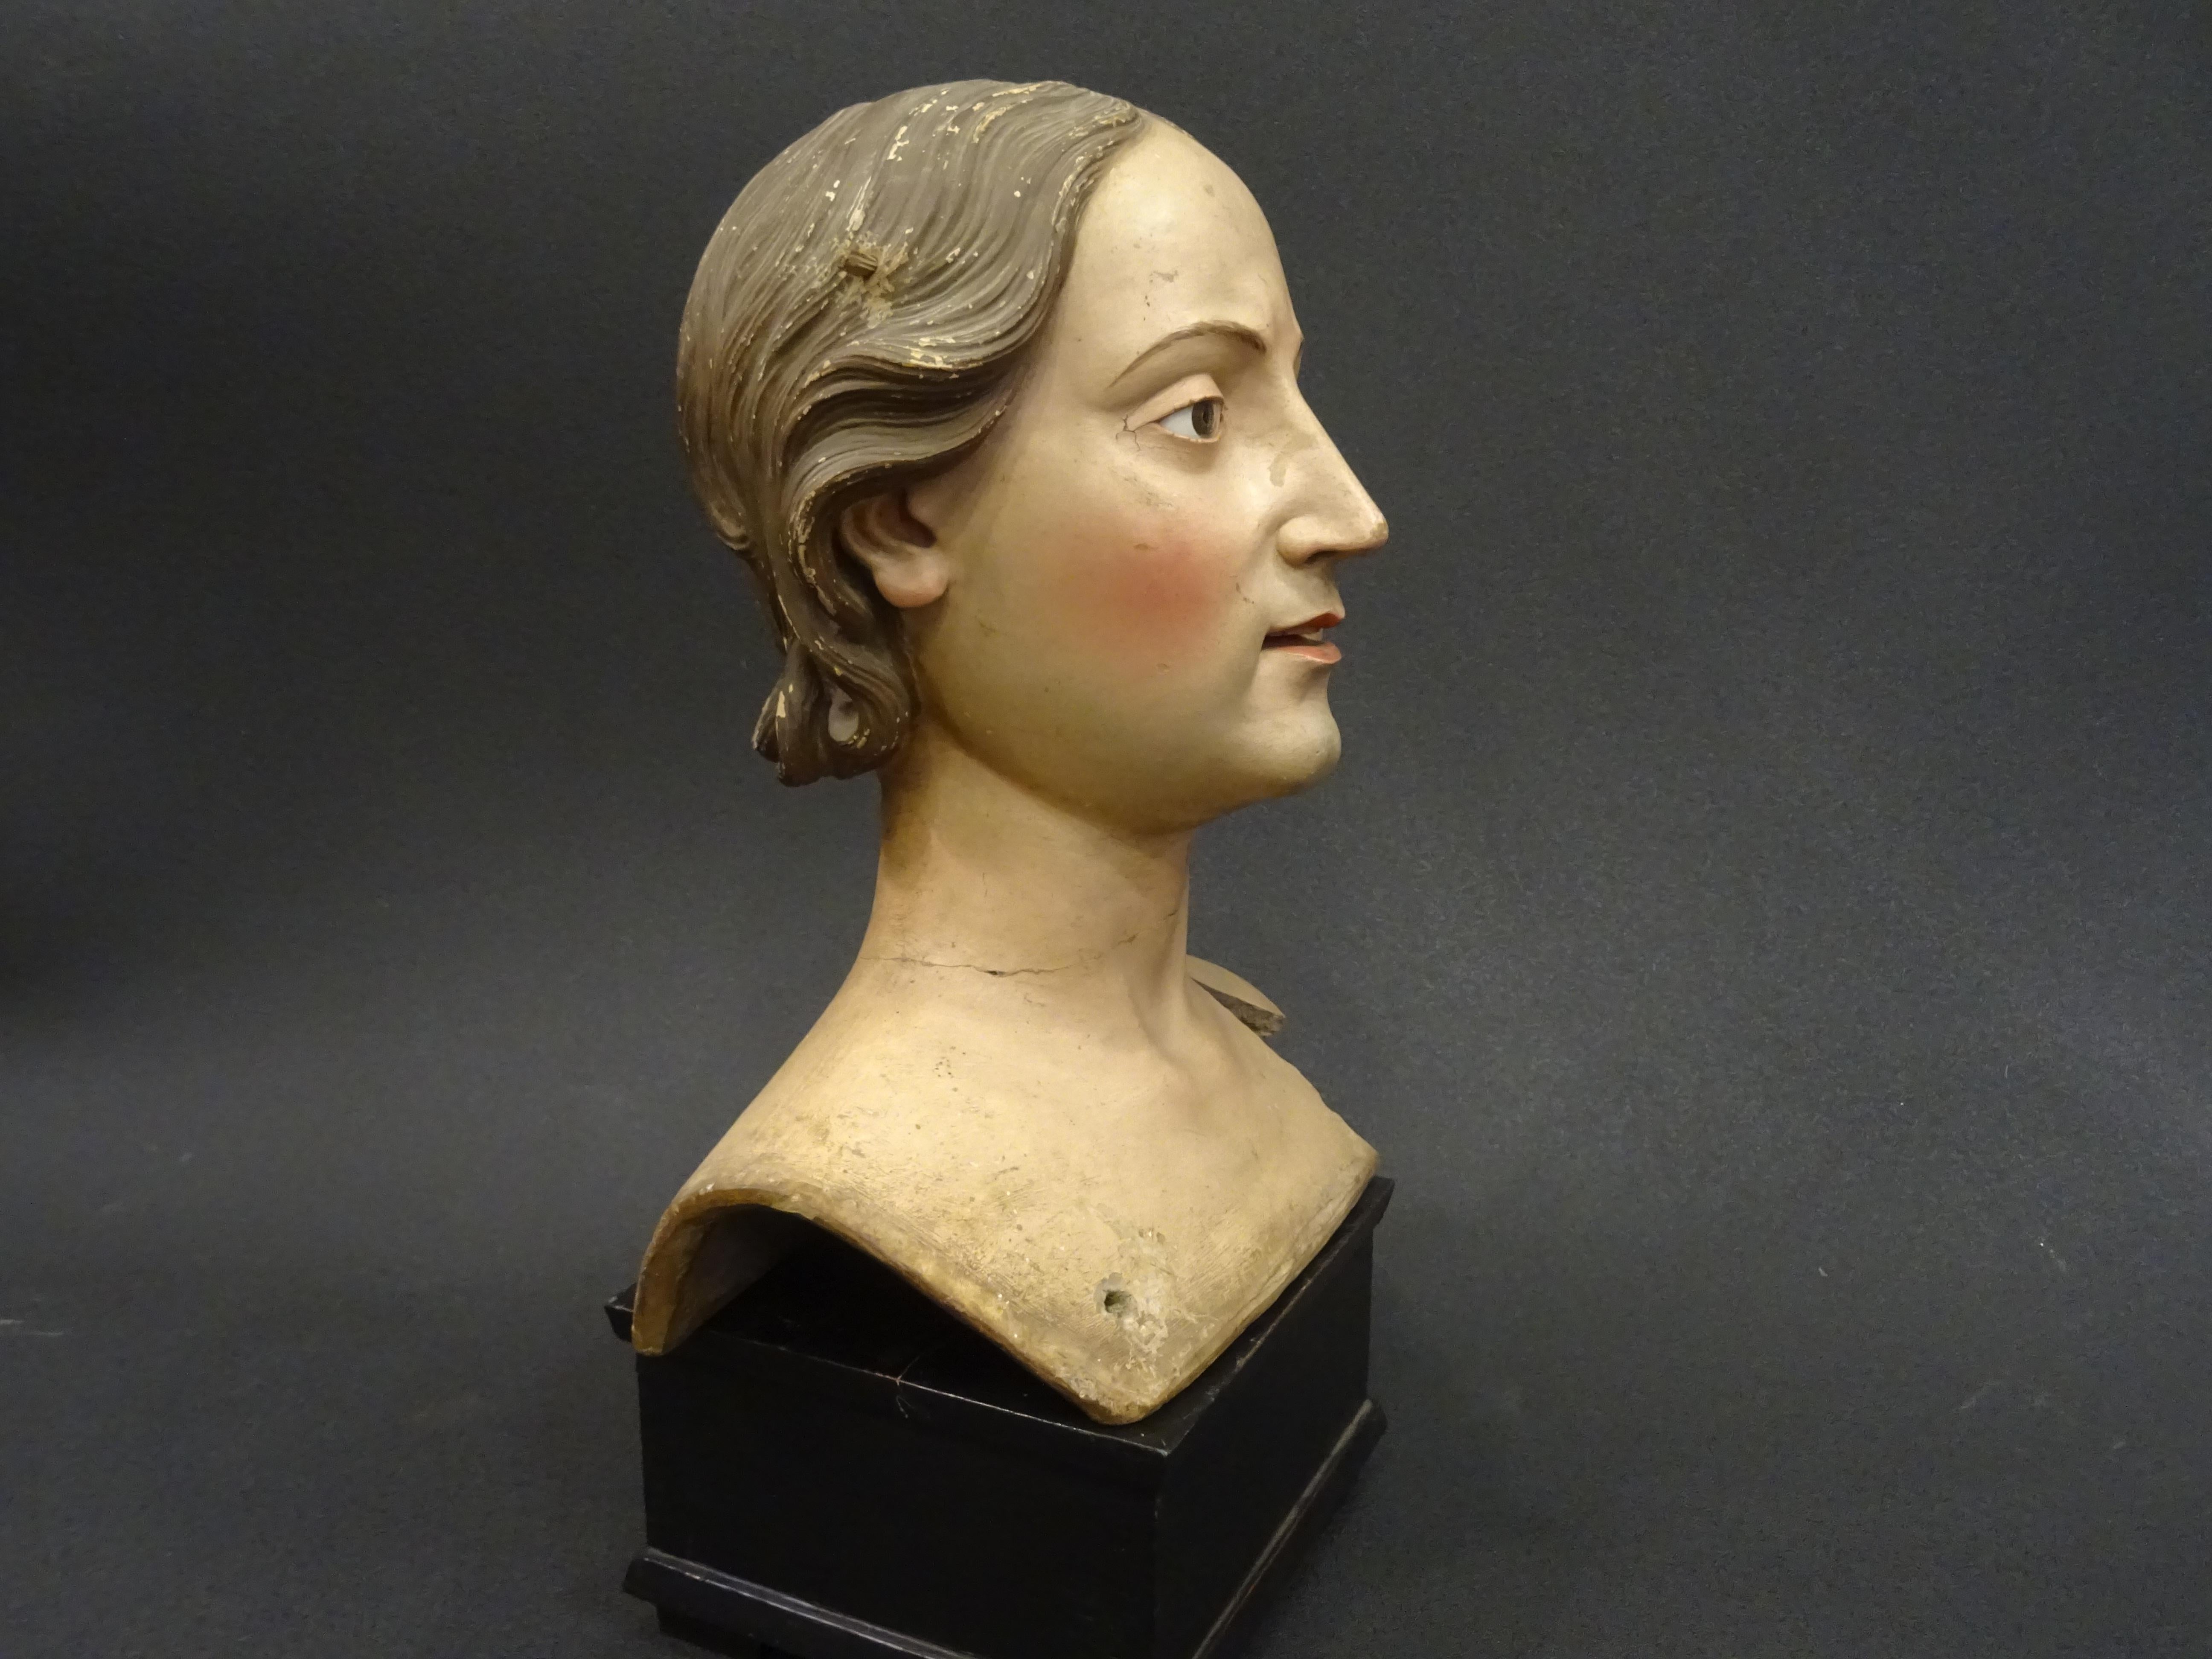 A beautiful bust of a saint in terracotta from Neapolitan school, Italy, 18th century, circa 1780,
of great expressiveness and vitreous paste eyes , with movement in the hair providing great naturalness.
It comes from a private collector in Milan,